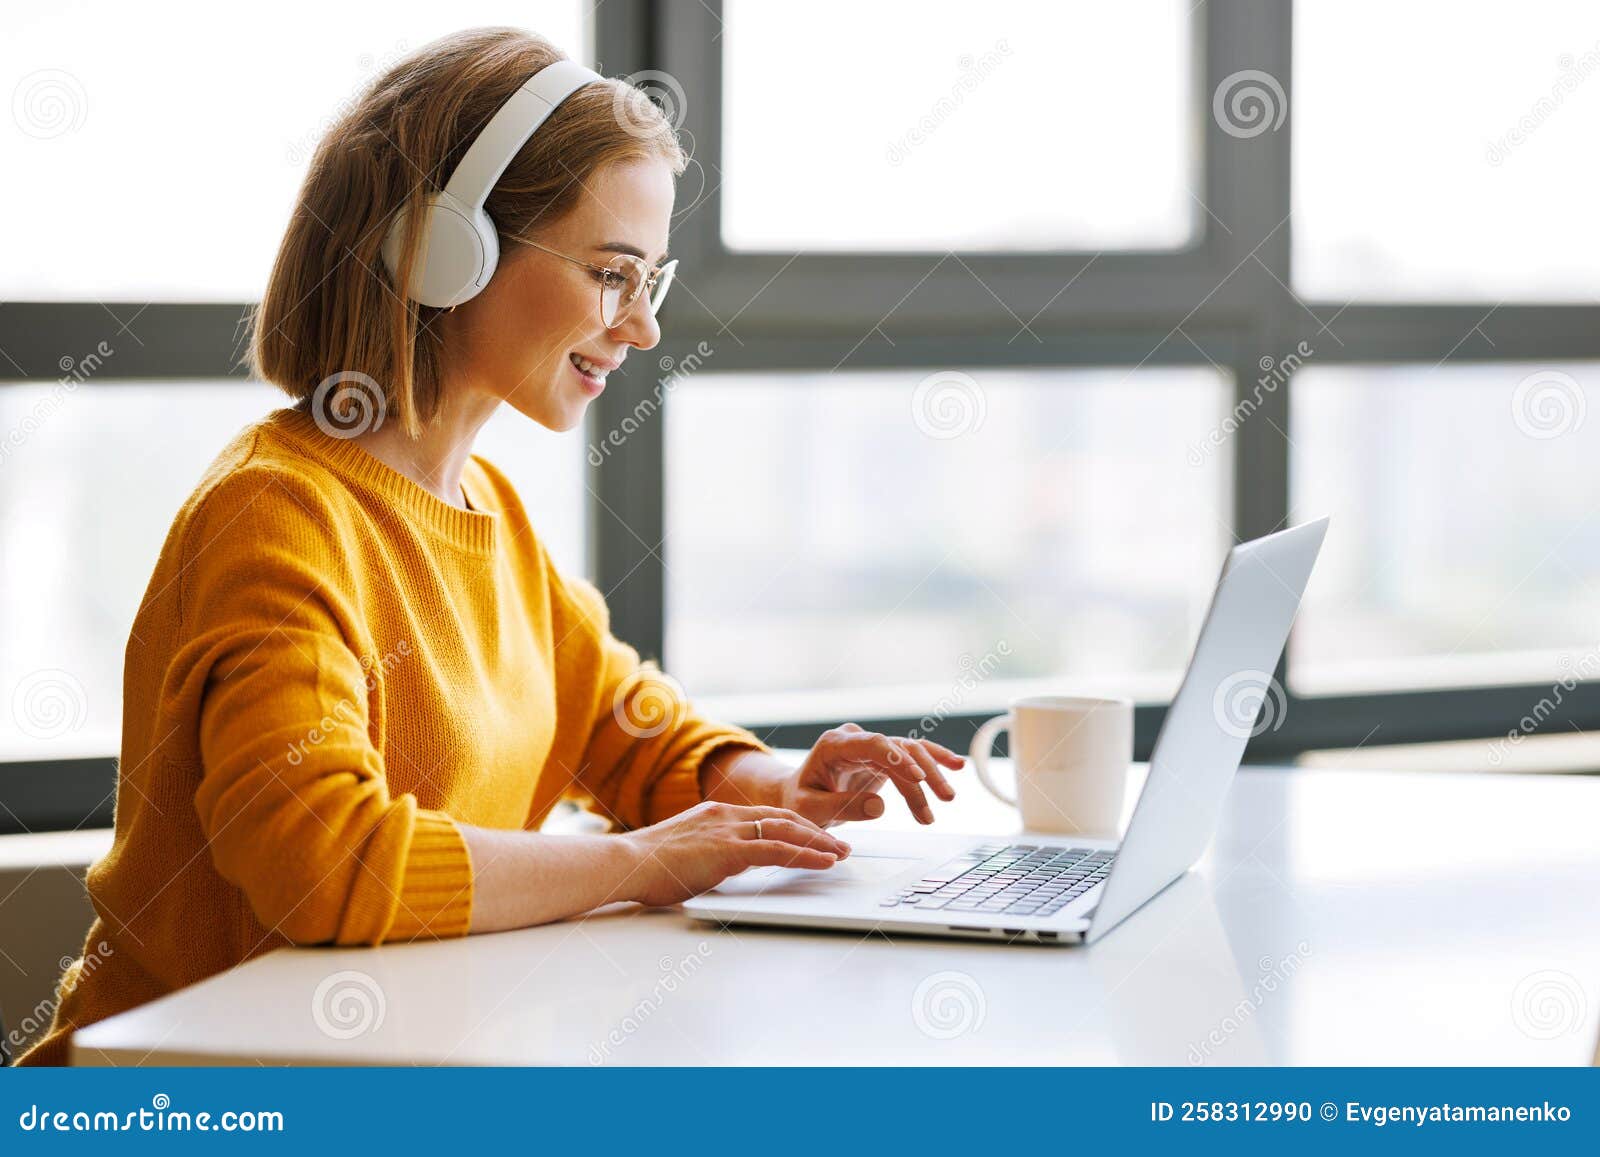 happy young female having video call while working remotely or studying online on laptop from home